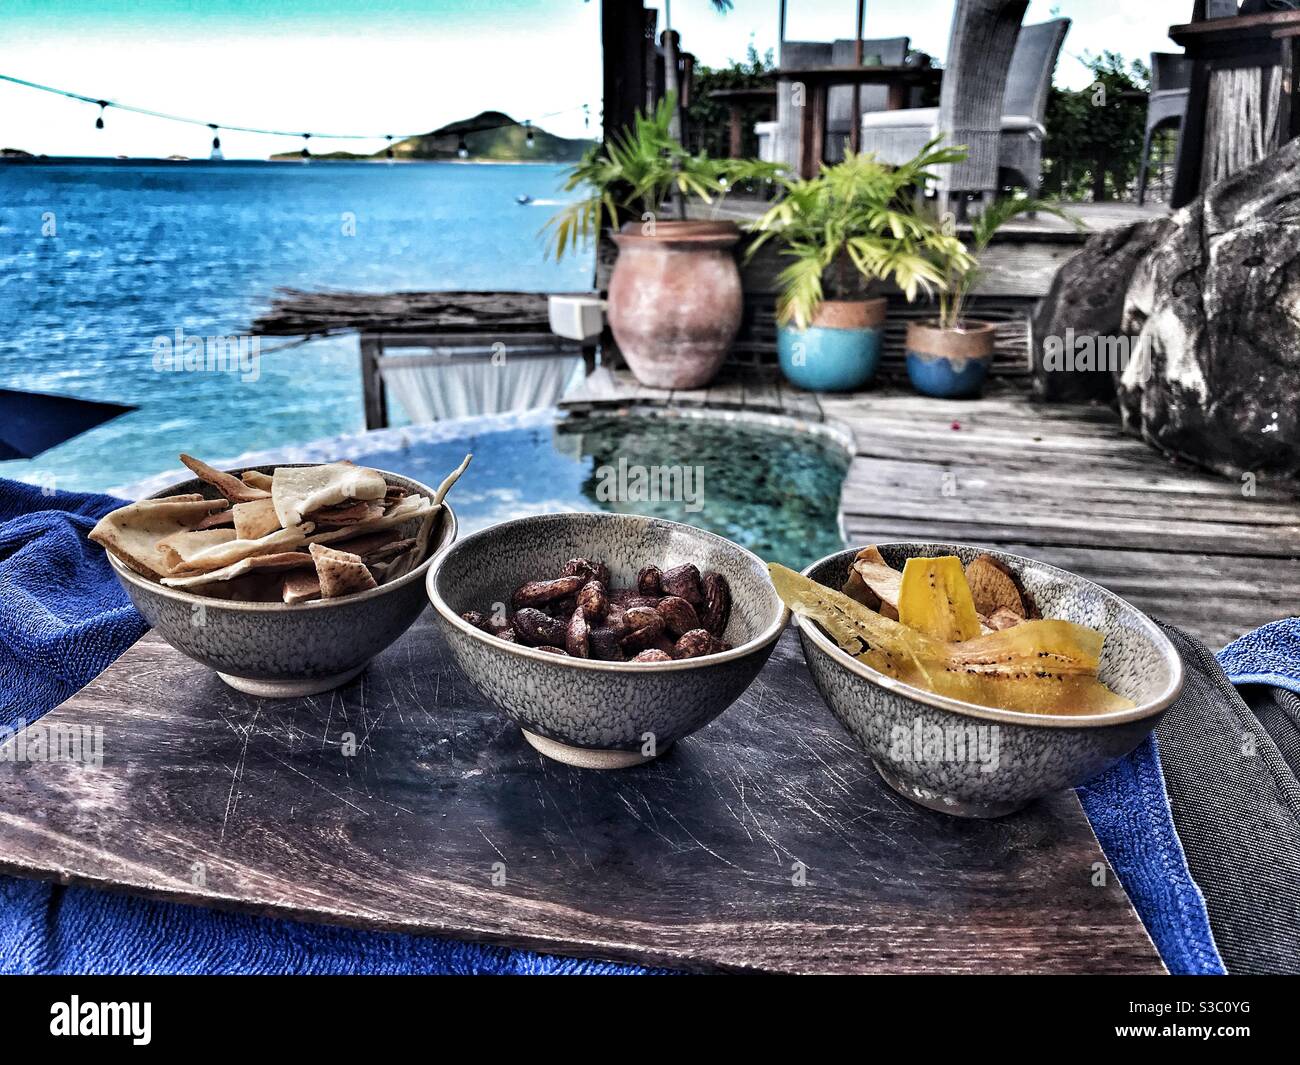 3 bowls of Tapas on a wooden board overlooking a plunge pool and Caribbean Sea at Sheer Rocks in Antigua Stock Photo